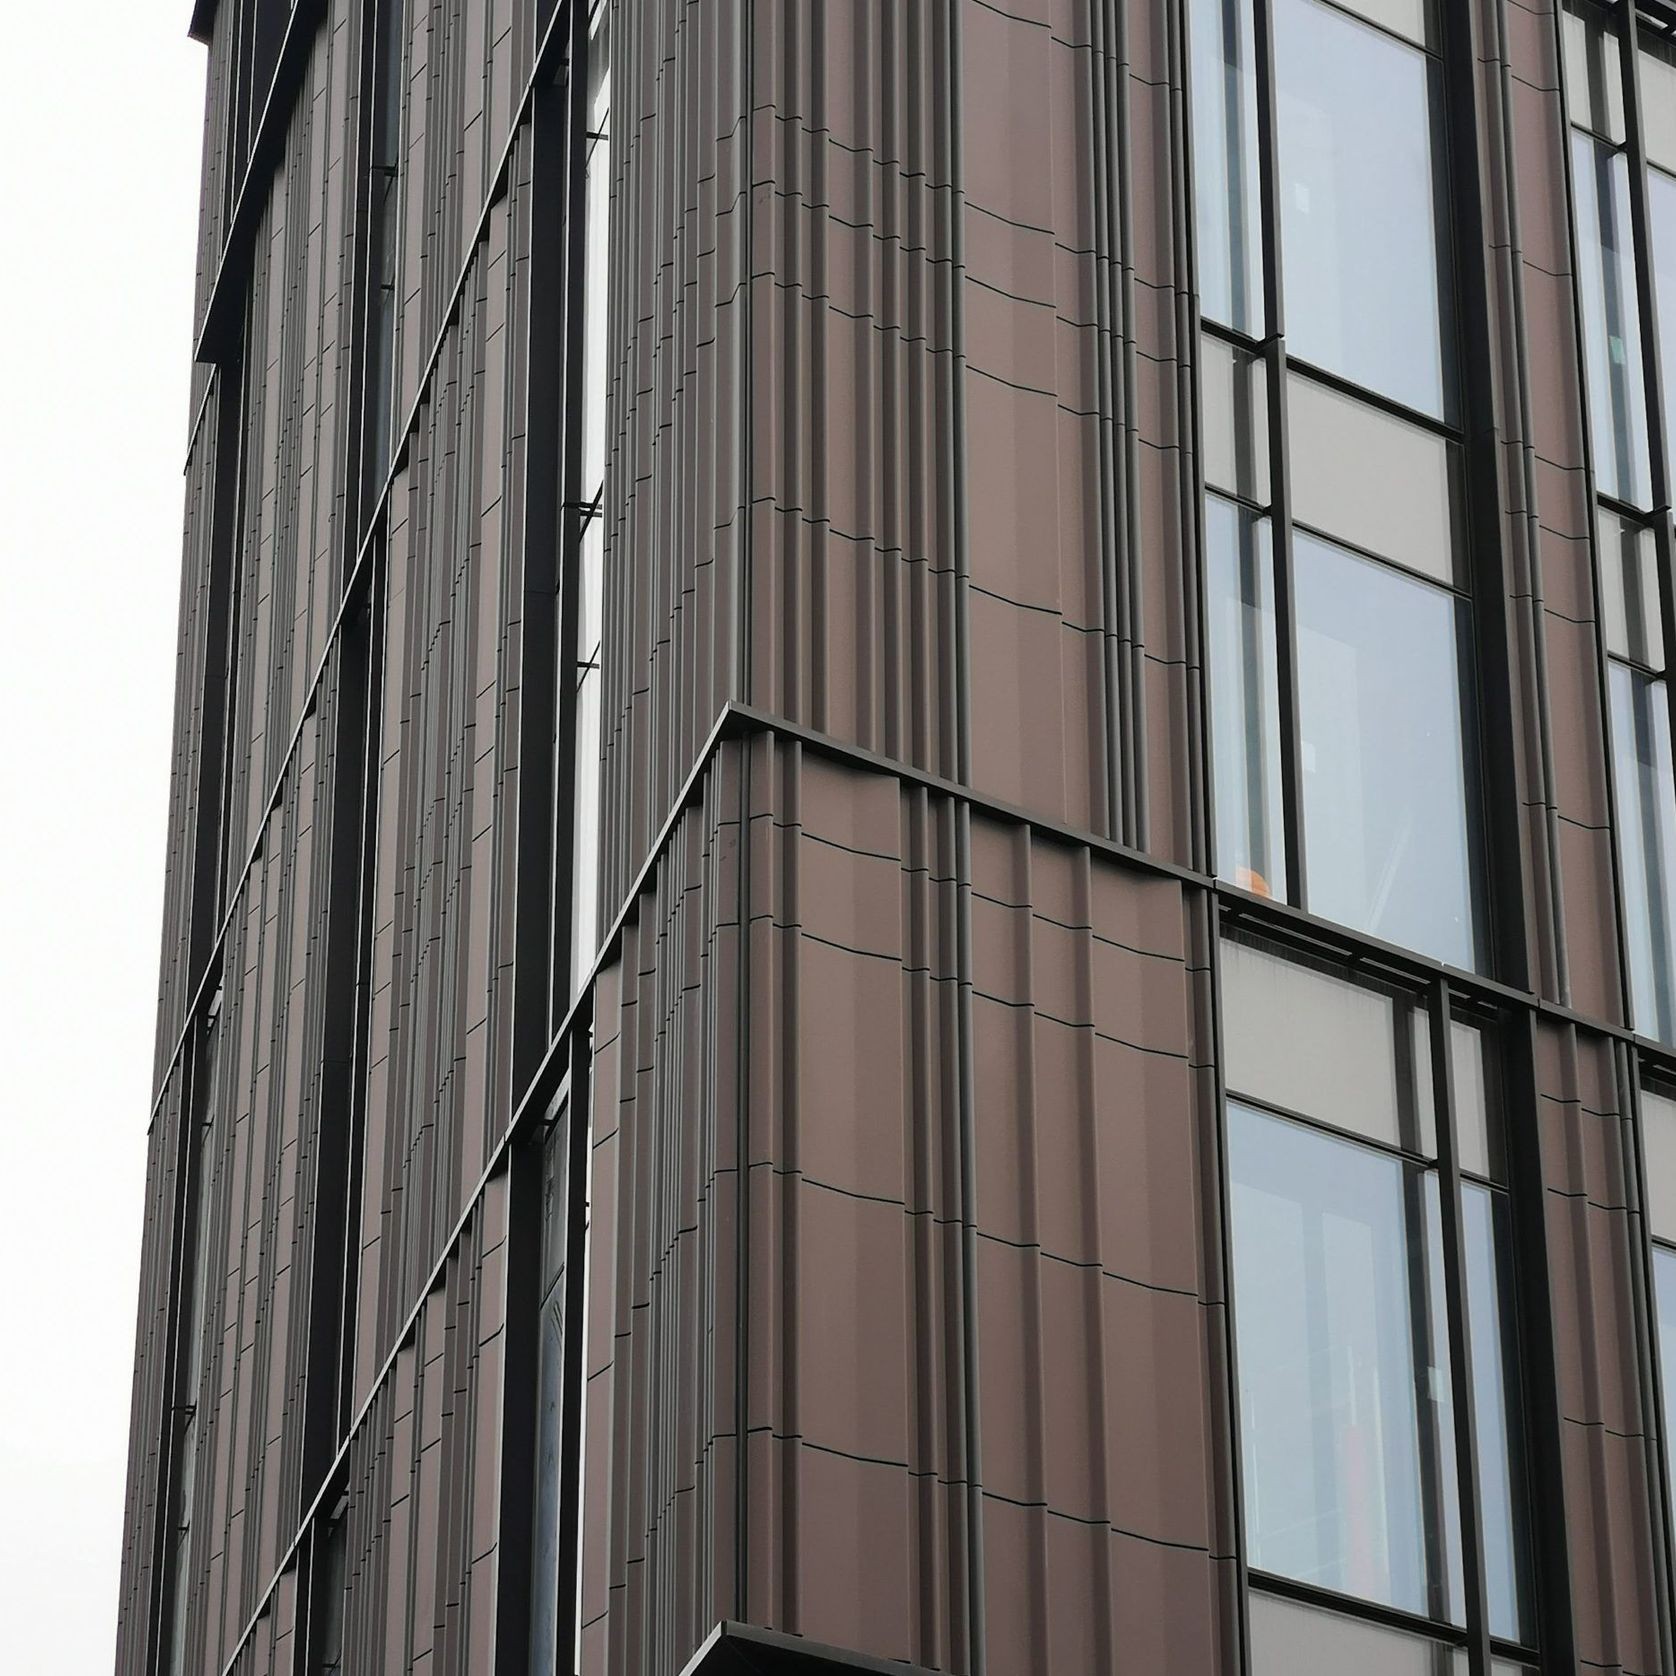 Terreal Terracotta Cladding gallery detail image